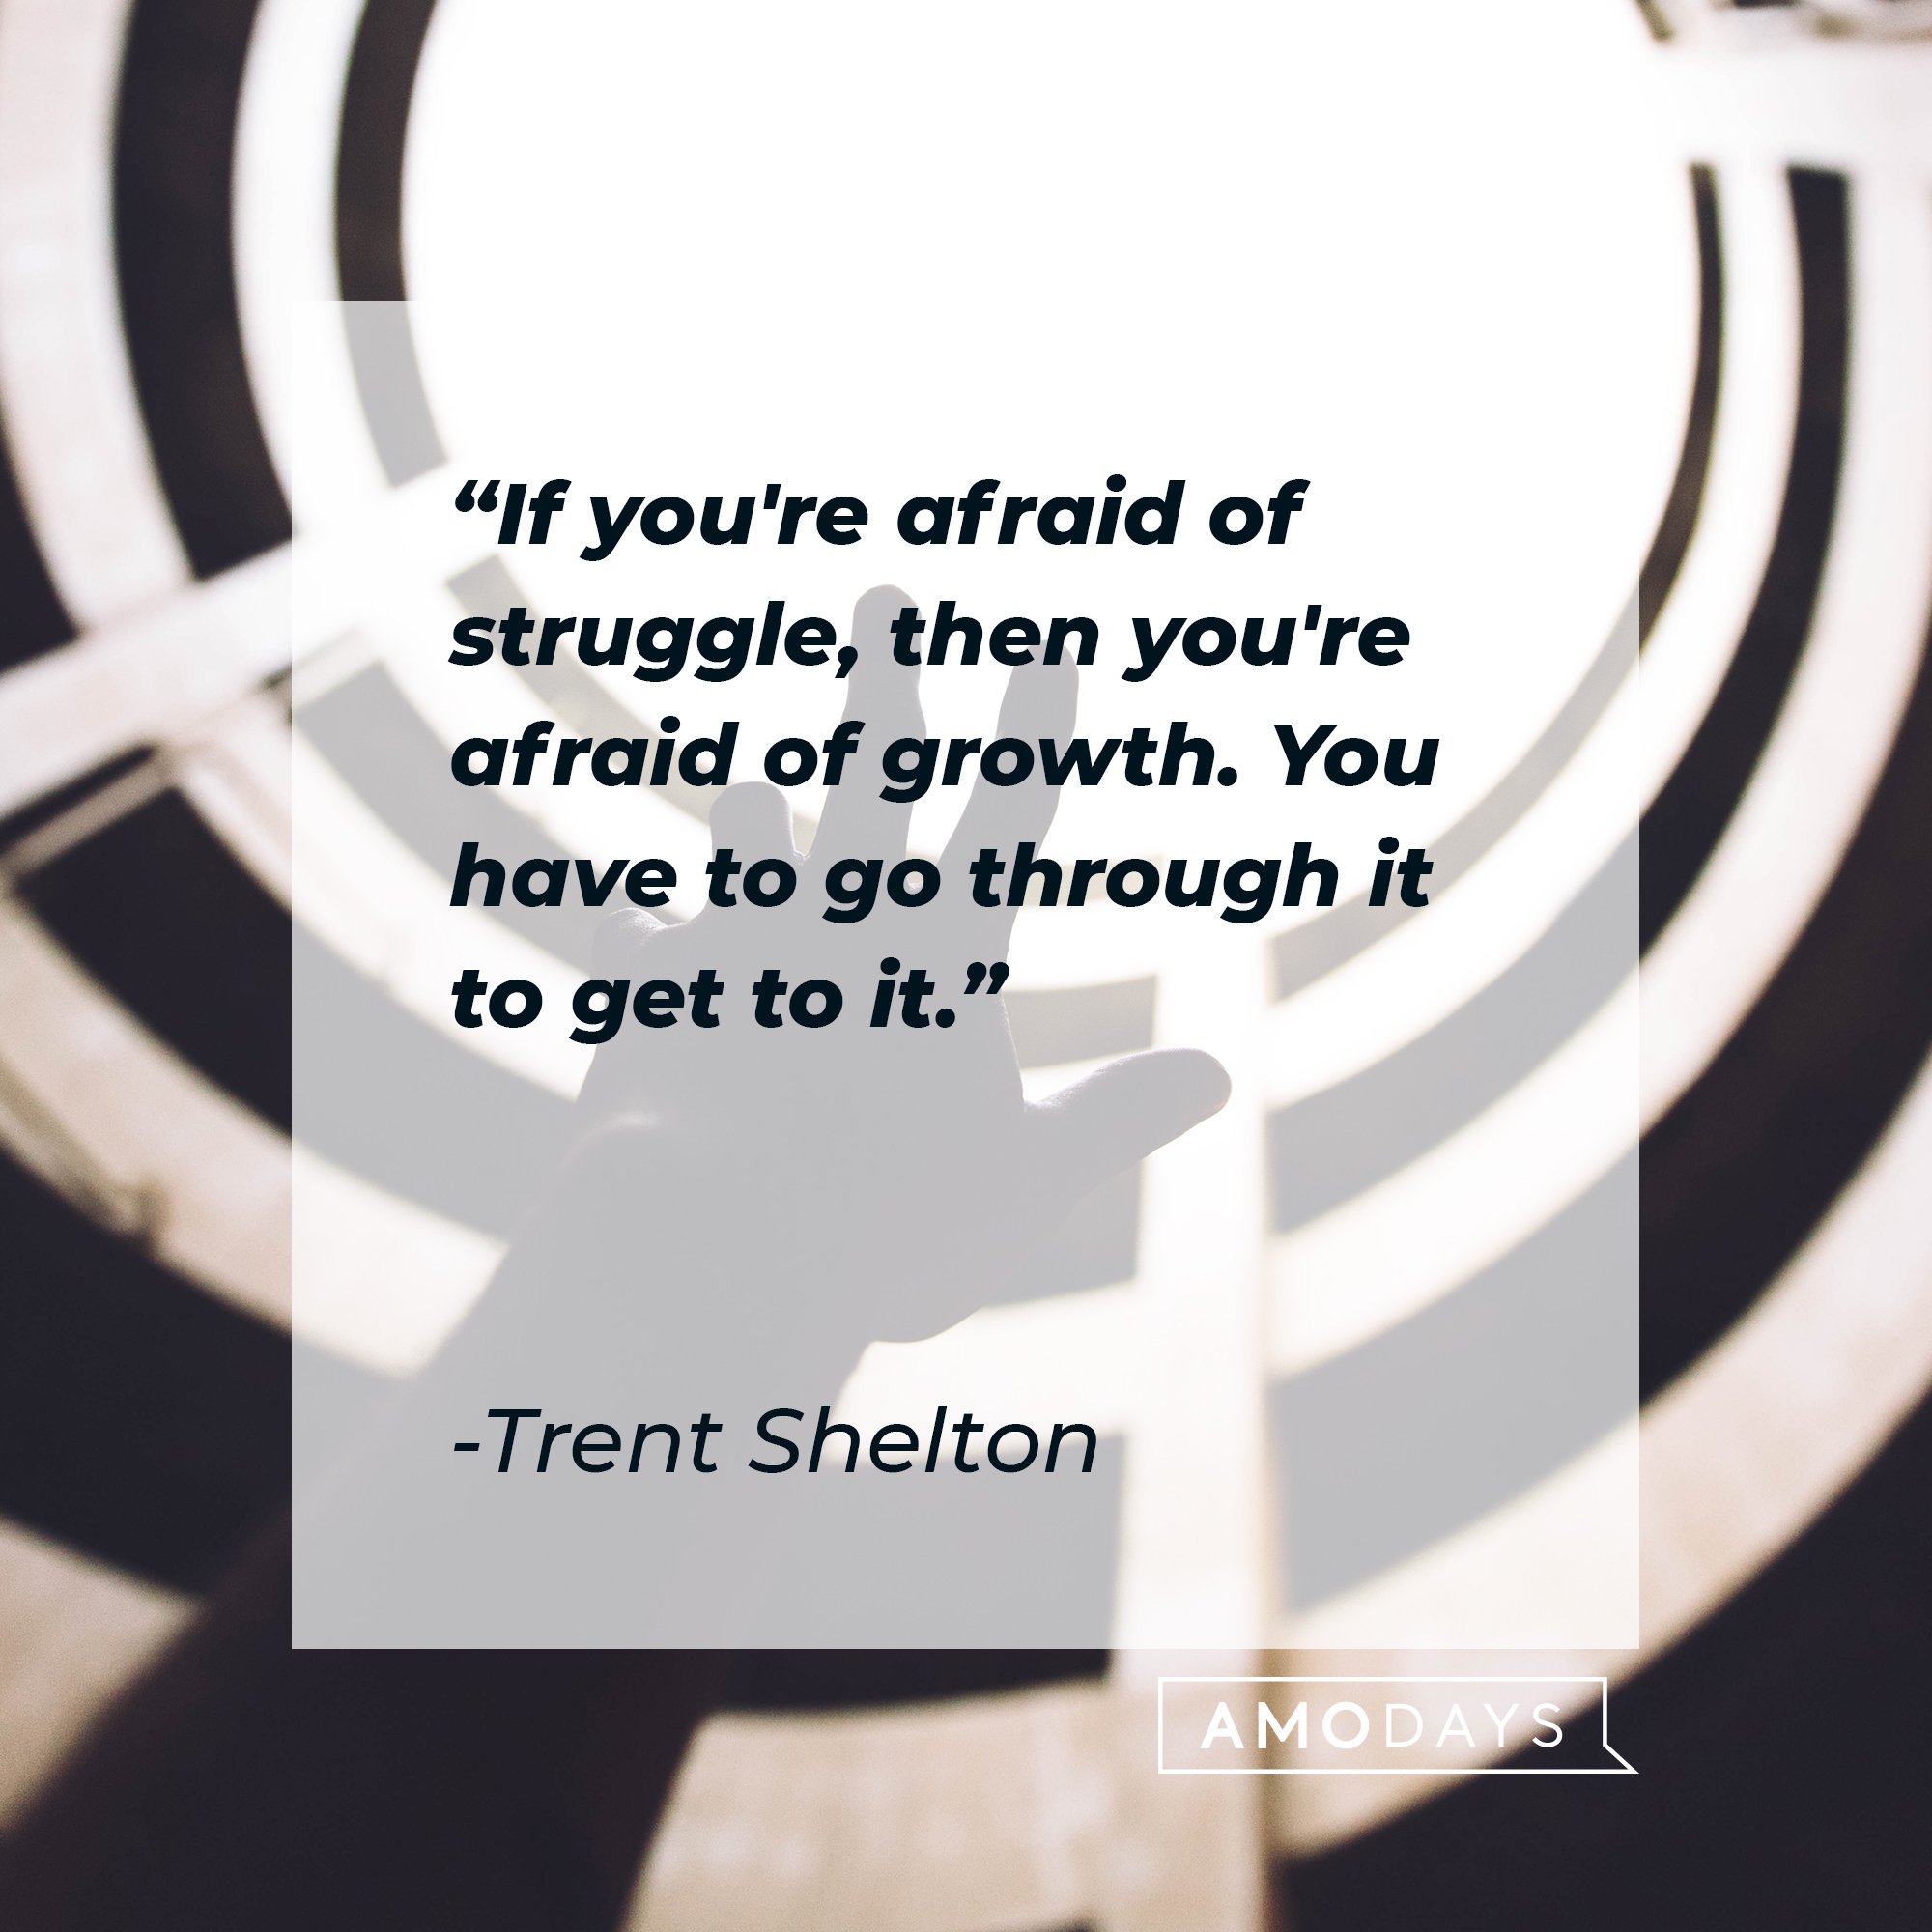  Trent Shelton's quote: "If you're afraid of struggle, then you're afraid of growth. You have to go through it to get to it." | Image: AmoDays